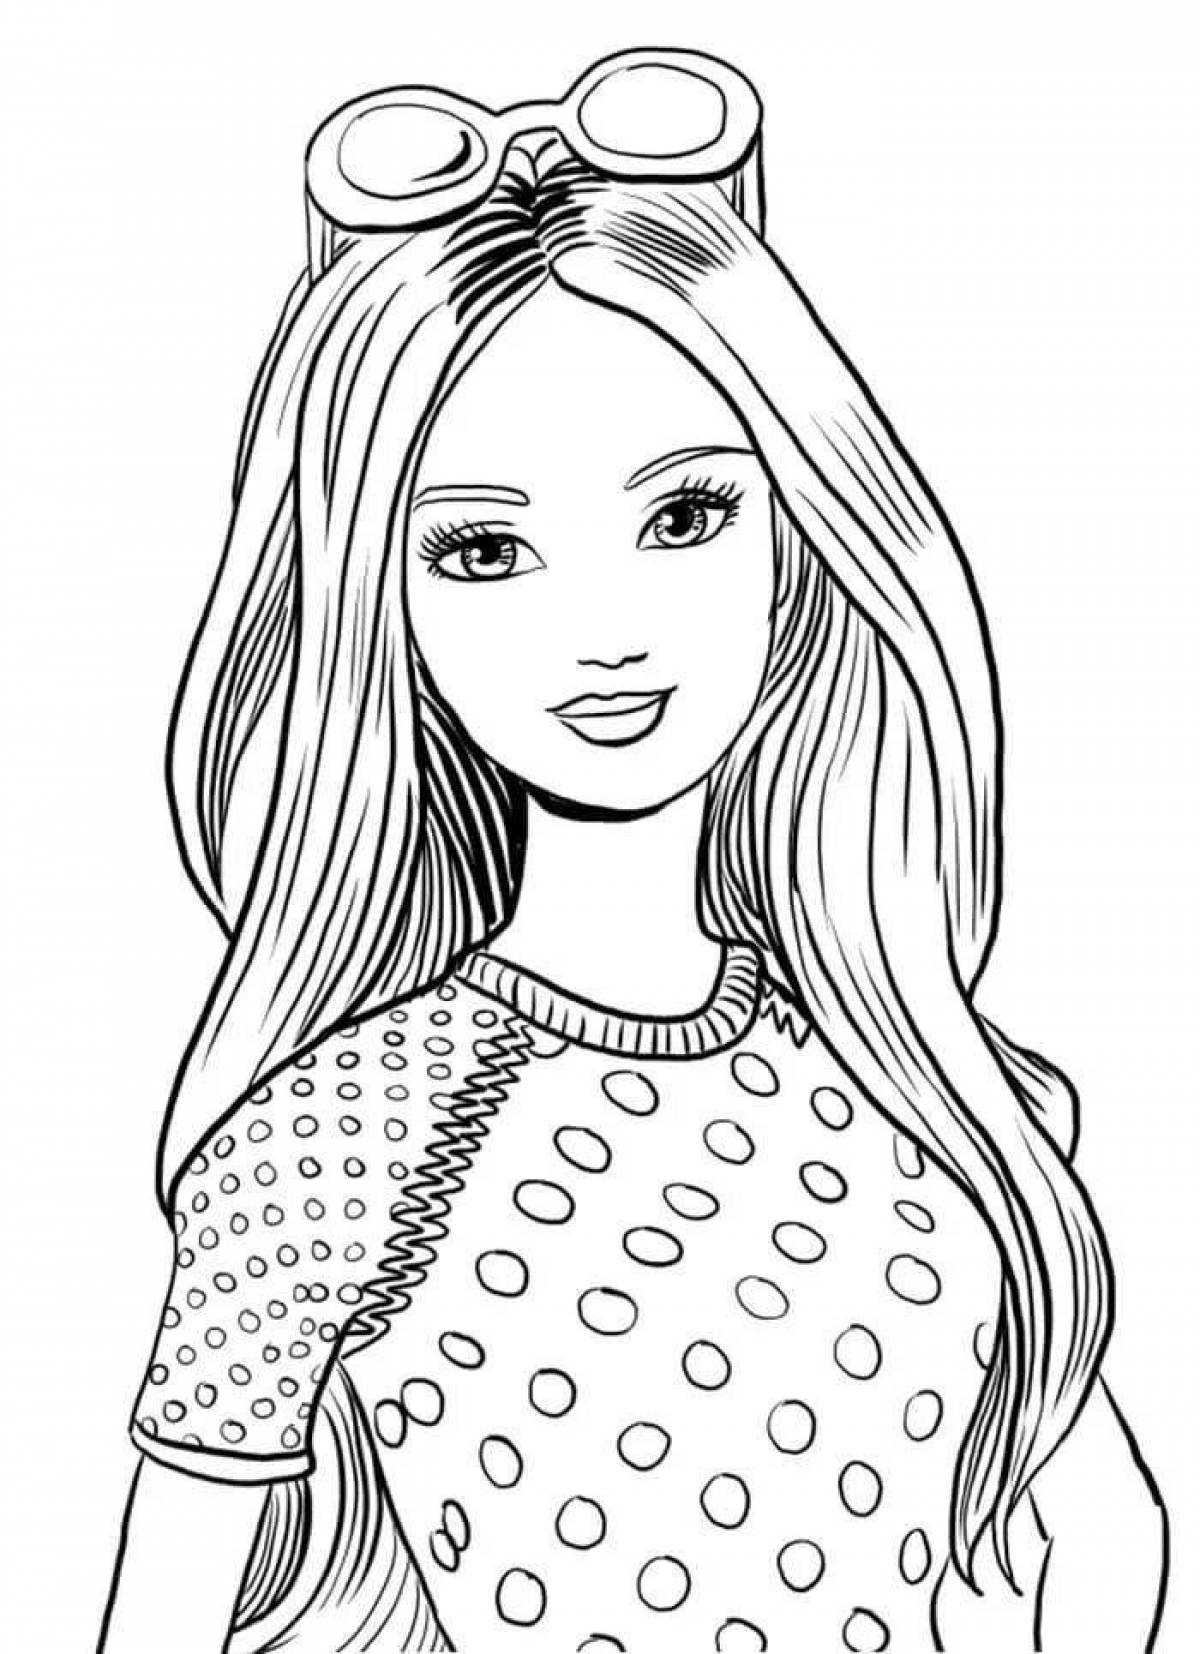 Amazing coloring pages for girls, easy and beautiful